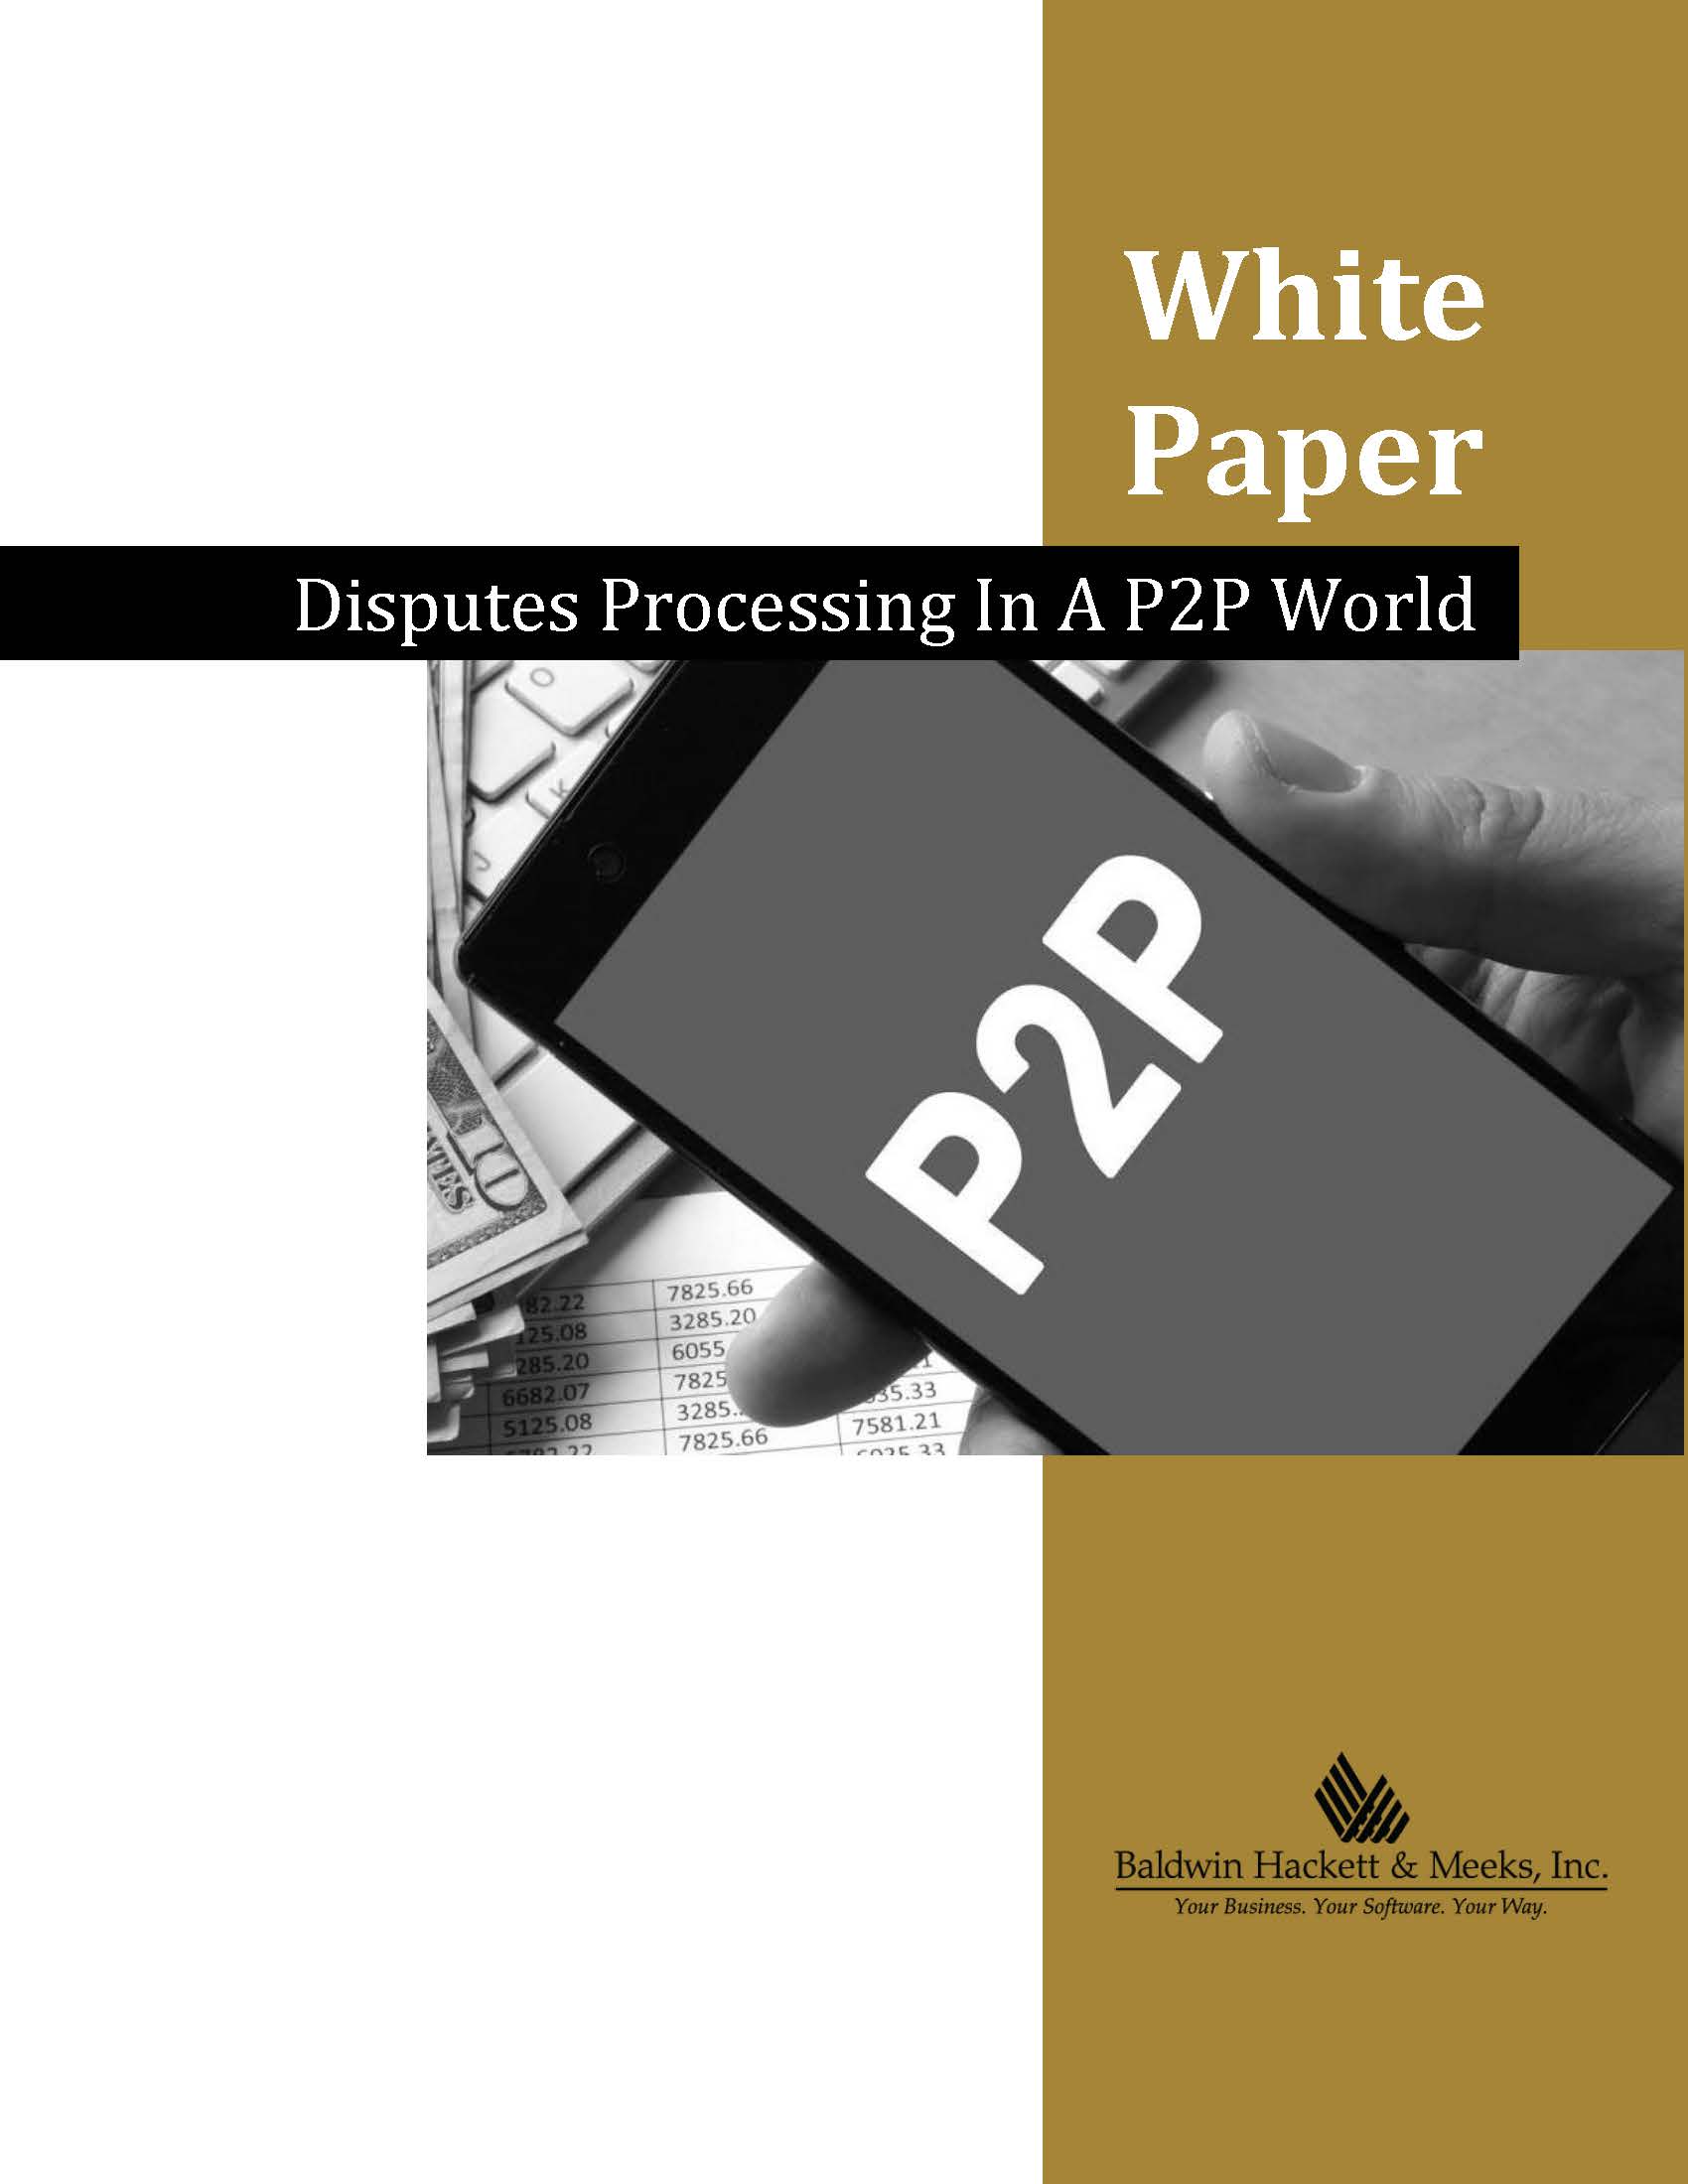 NEW WHITE PAPER: DISPUTES PROCESSING IN A P2P WORLD